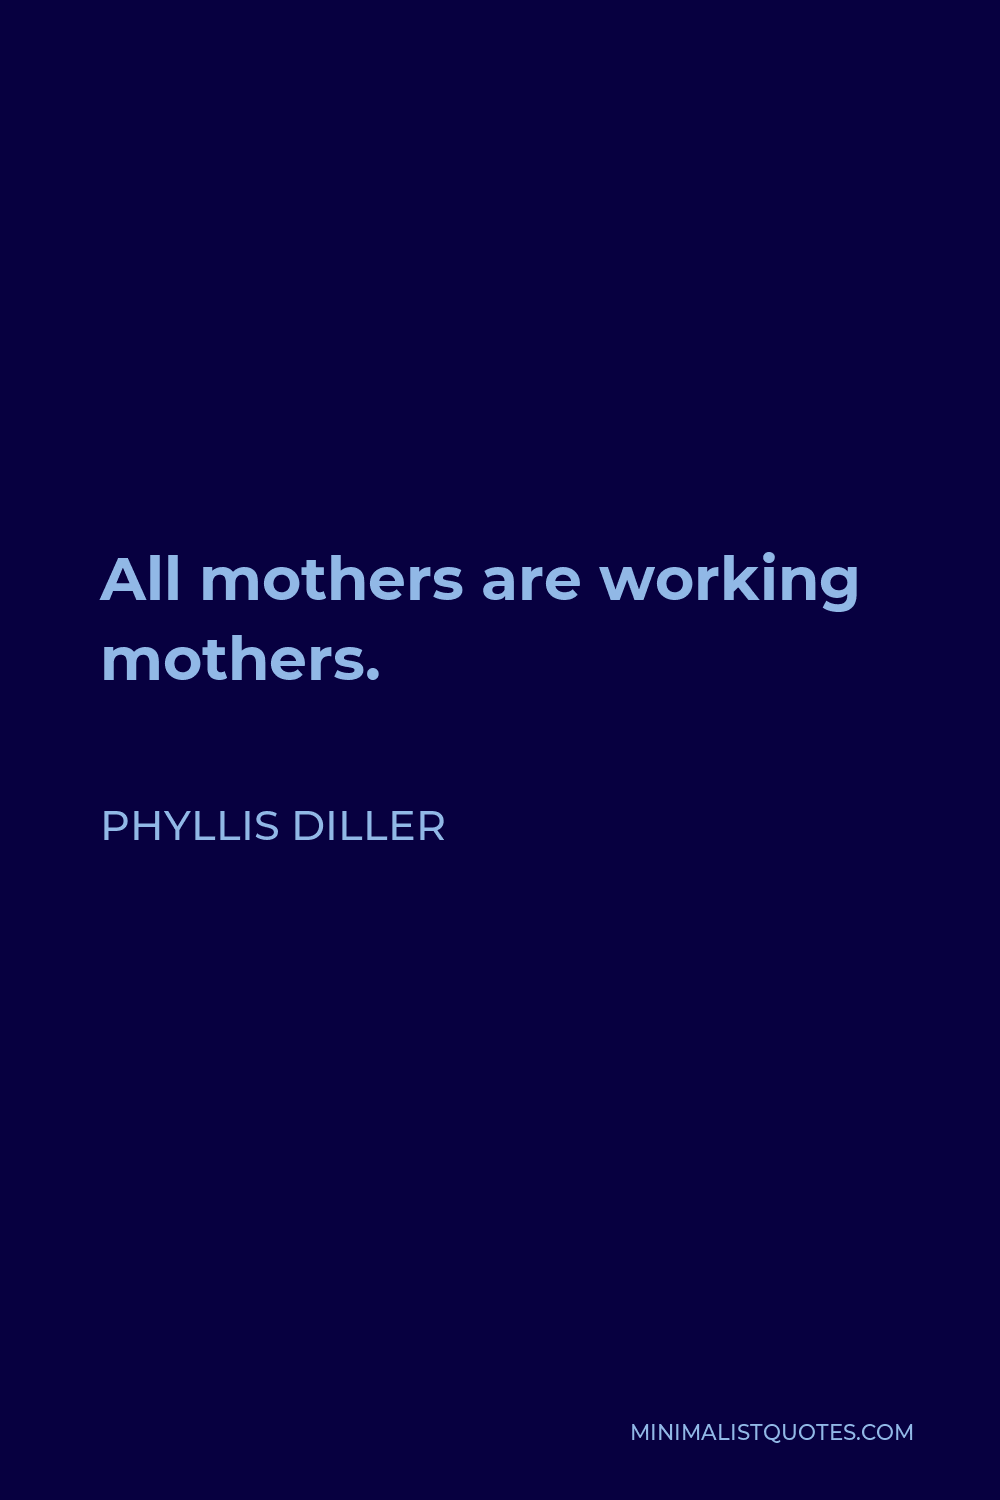 Phyllis Diller Quote - All mothers are working mothers.